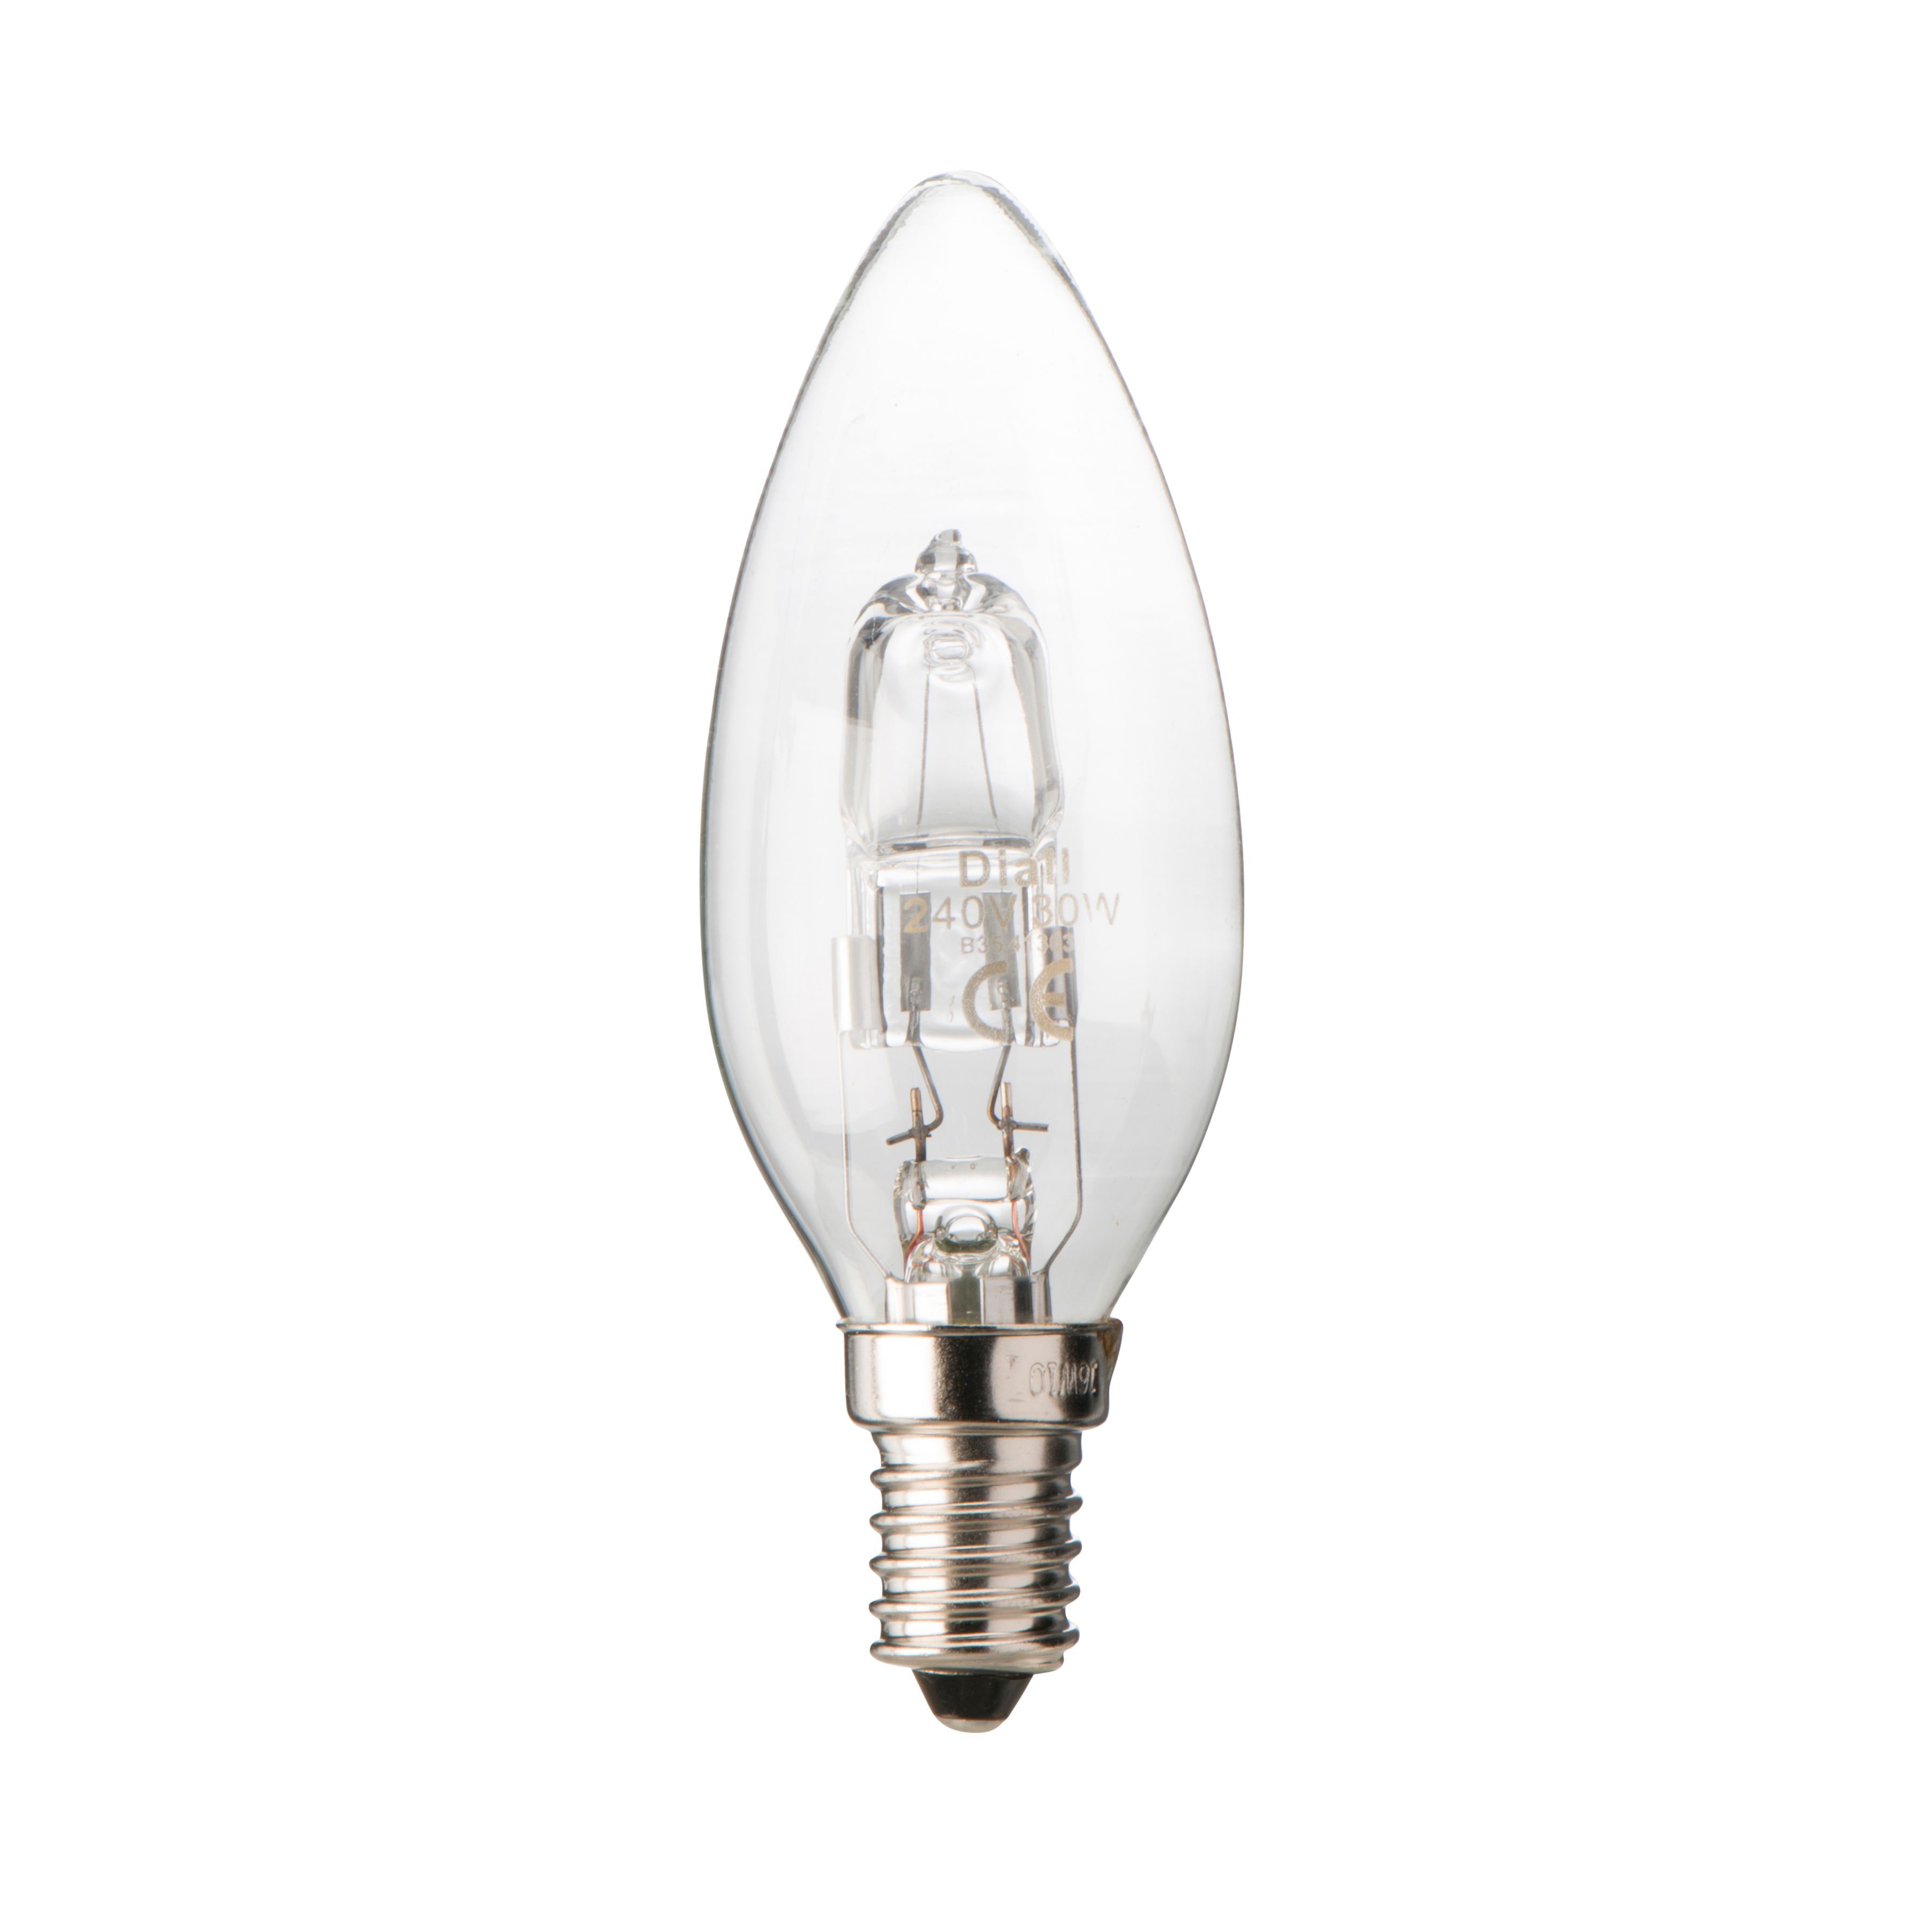 Diall E14 30W Candle Halogen Dimmable Light bulb, Pack of 3